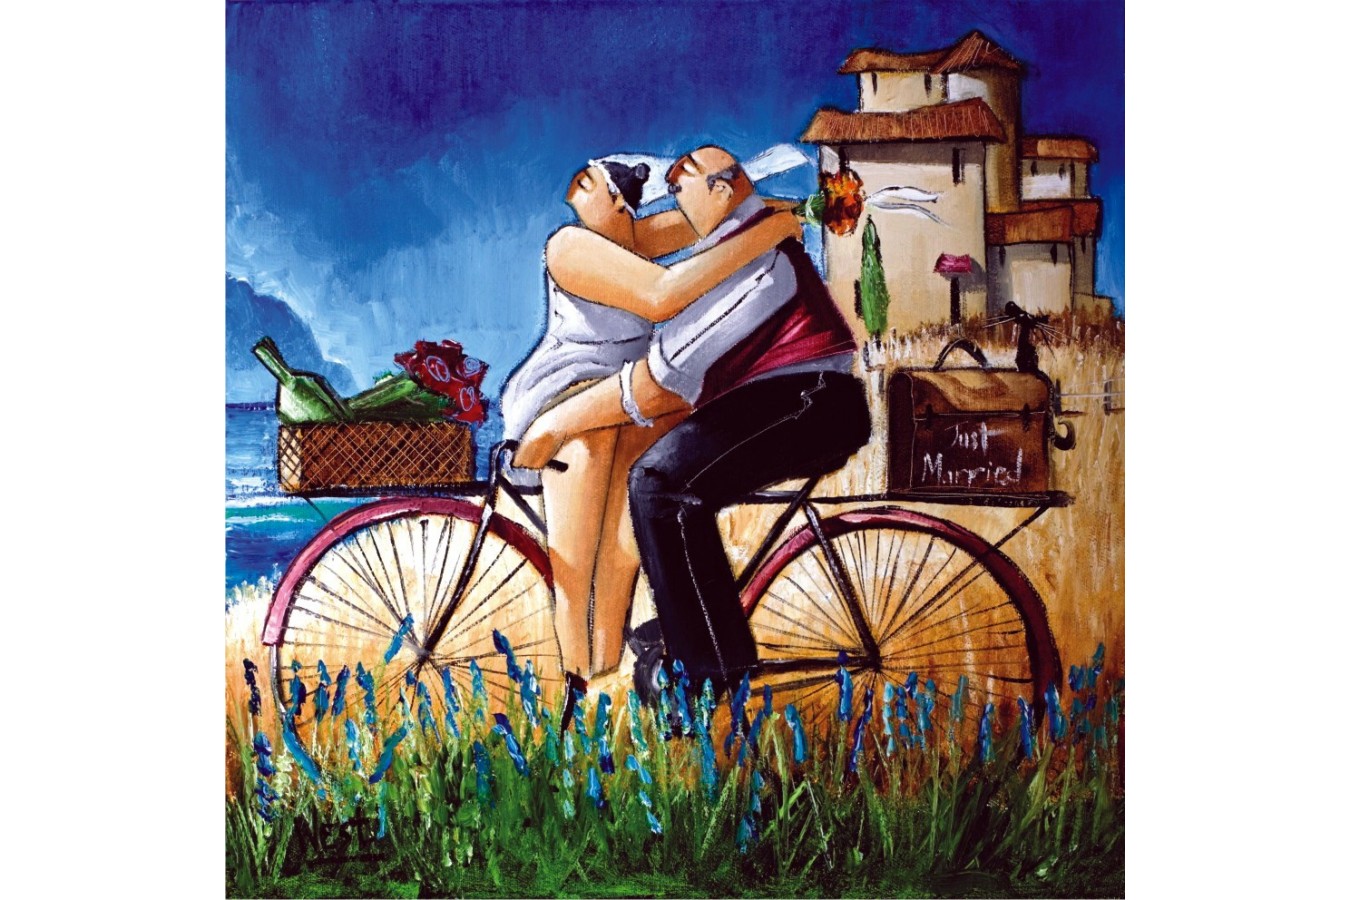 Puzzle Anatolian - Just Married, 1024 piese (1013)